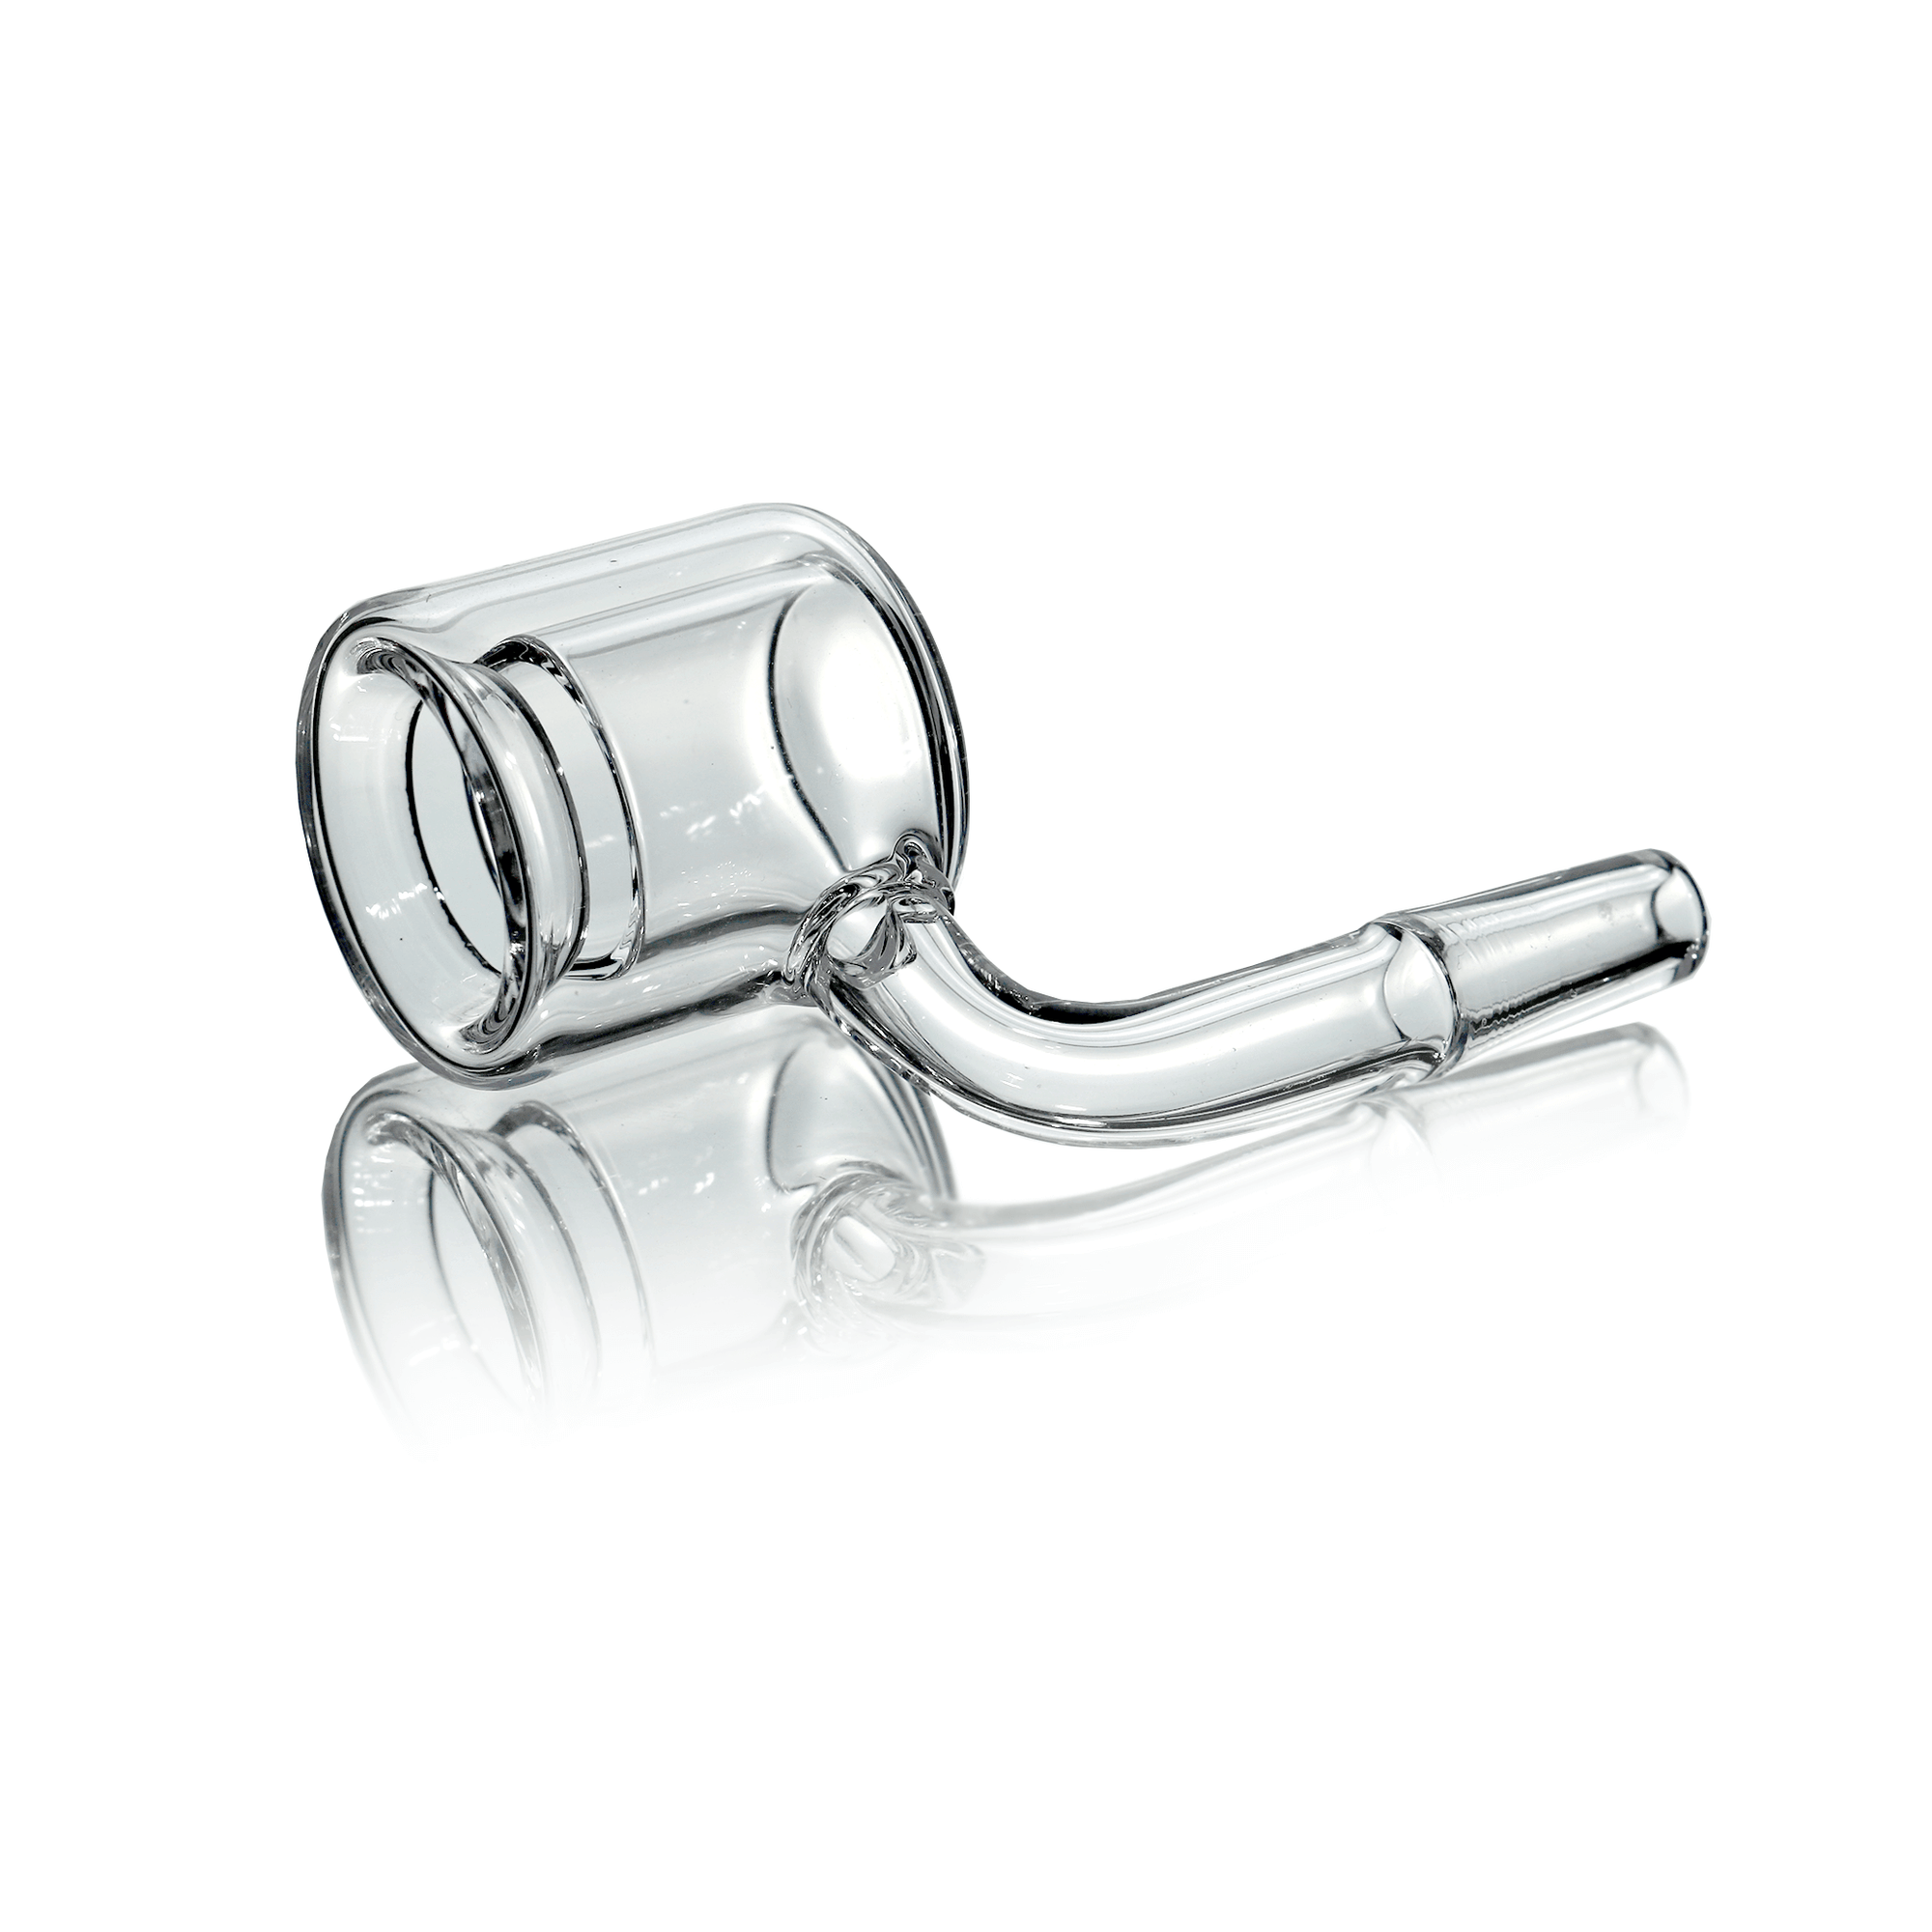 Quartz Double Wall Banger (Torch) | 10mm Male | the dabbing specialists